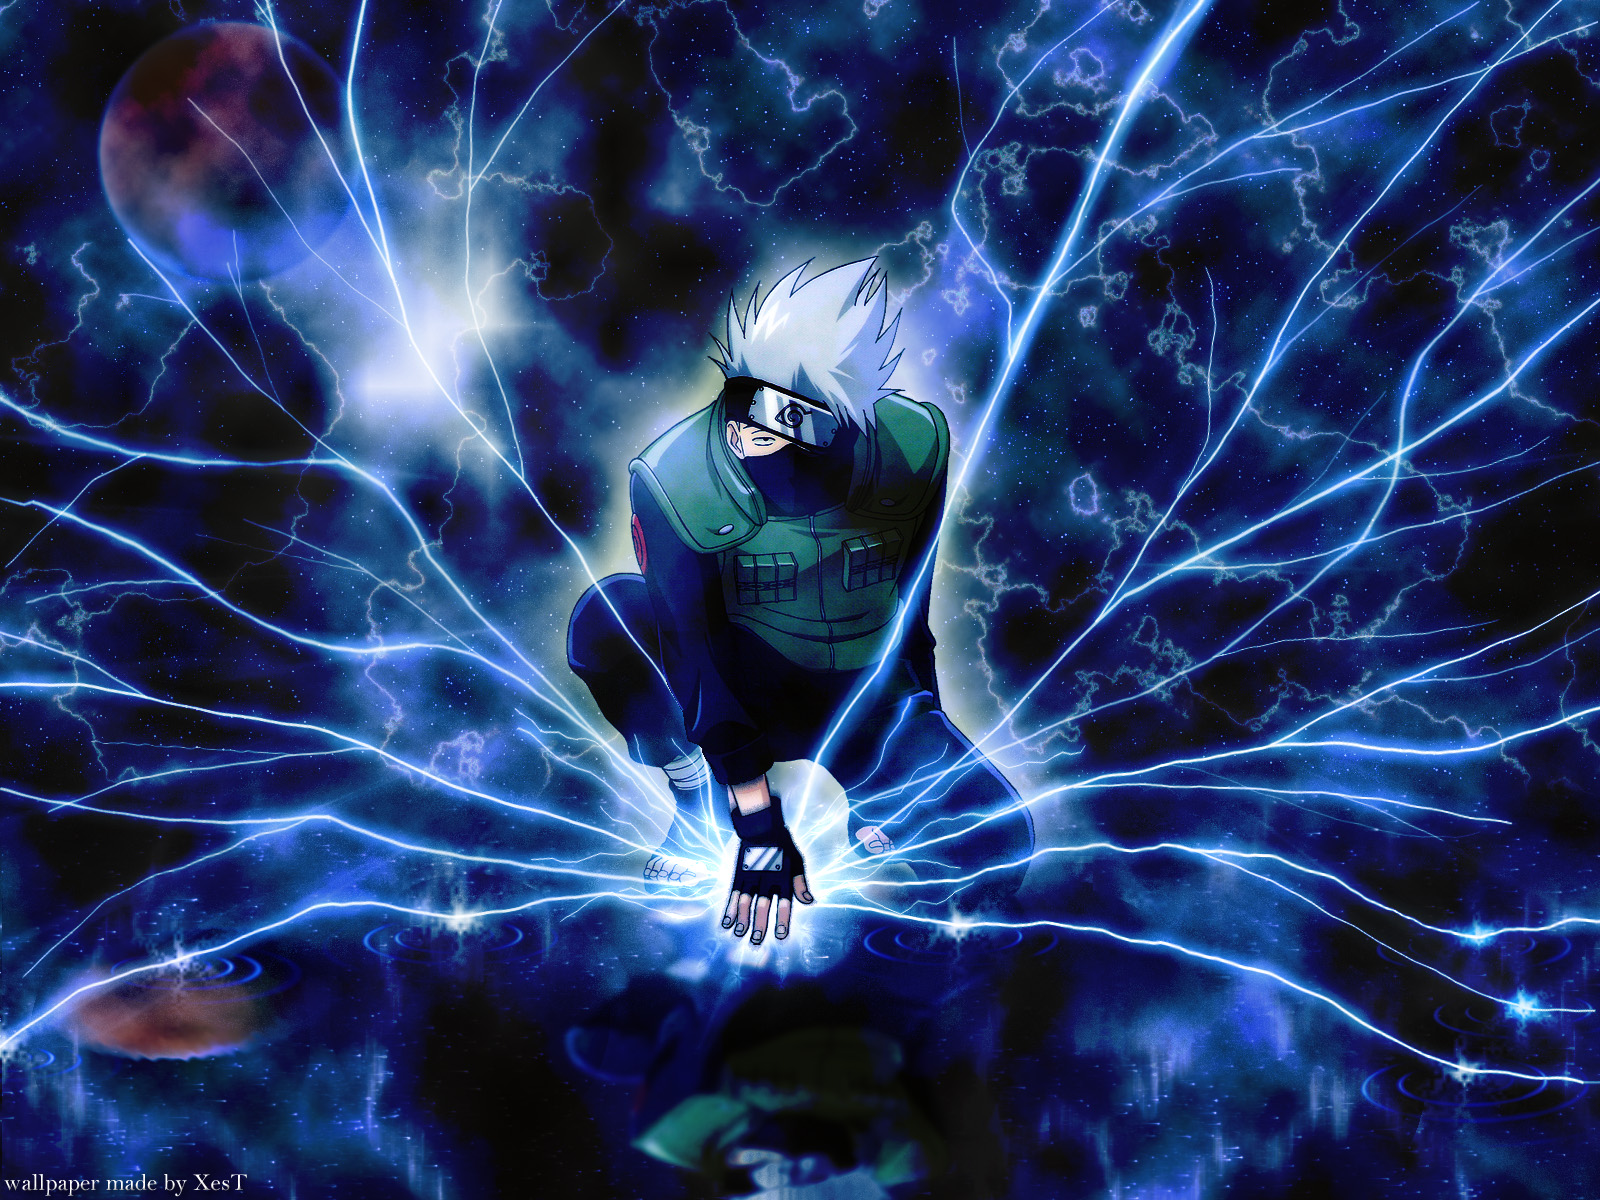 And Cool Naruto High Definition Wallpaper For Your Desktop Enjoy